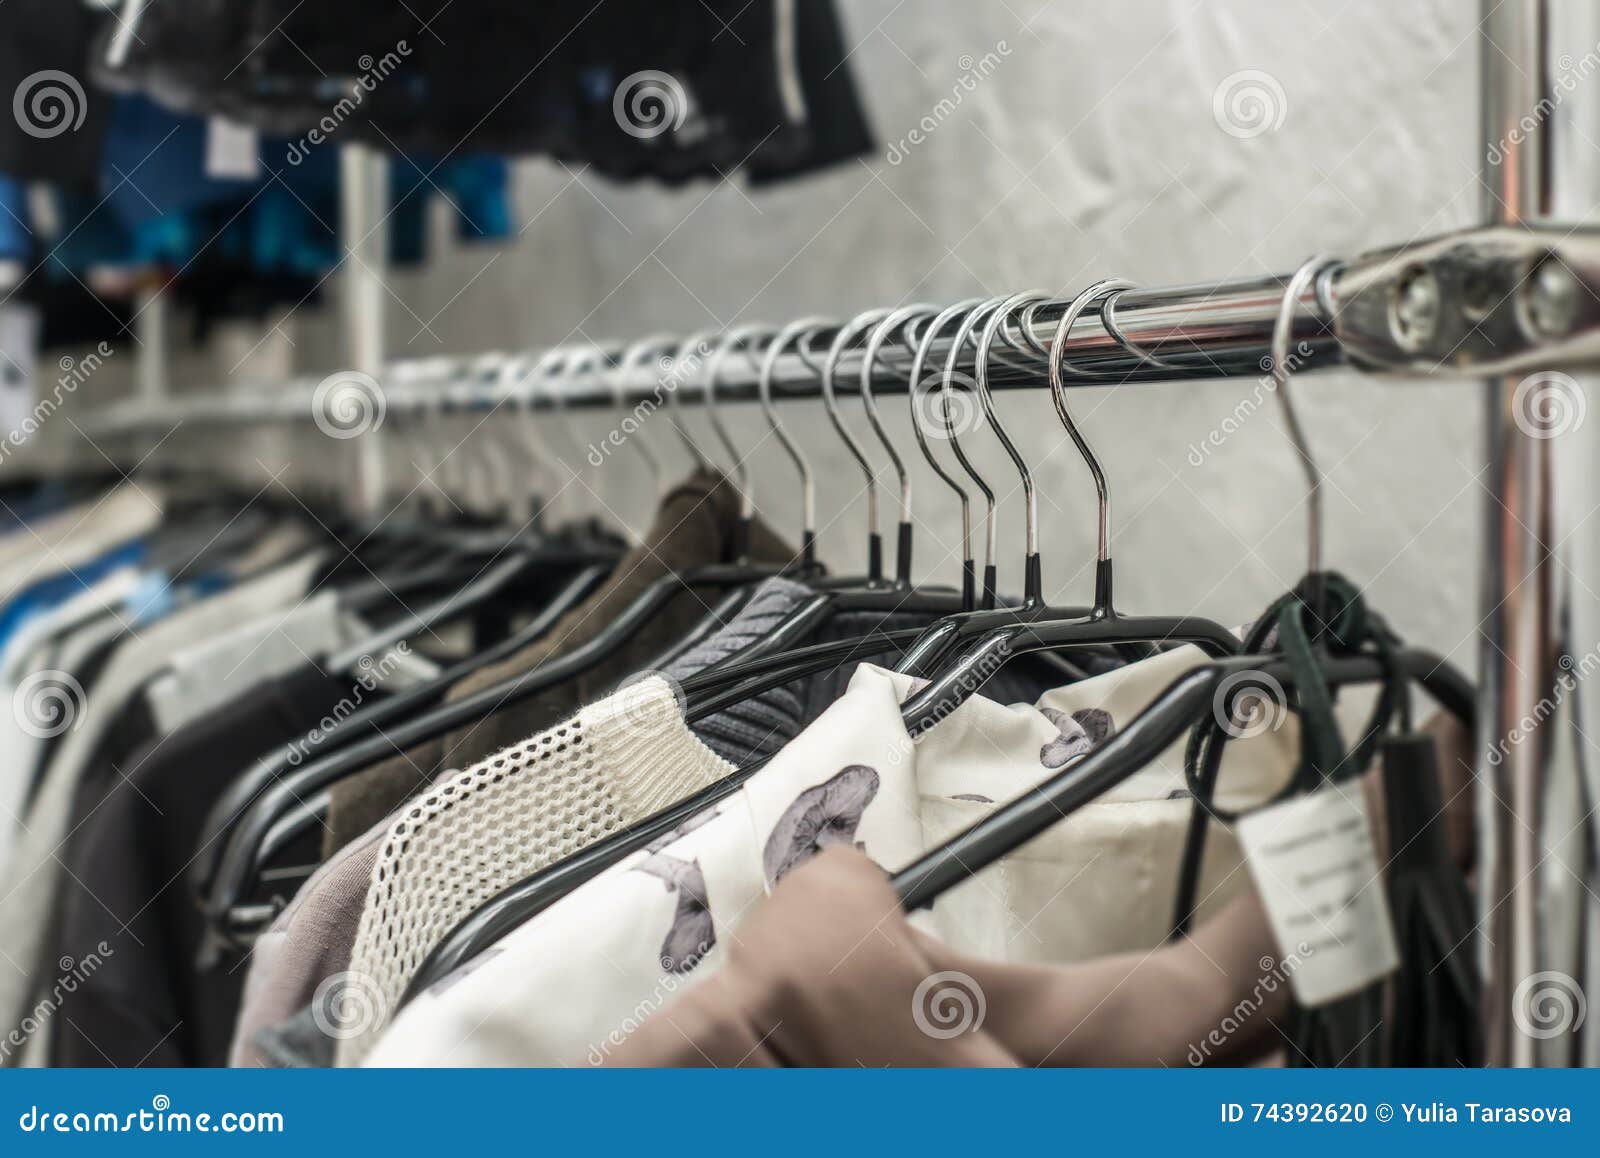 Clothes Hang on a Shelf in a Clothes Store Stock Photo - Image of dress ...